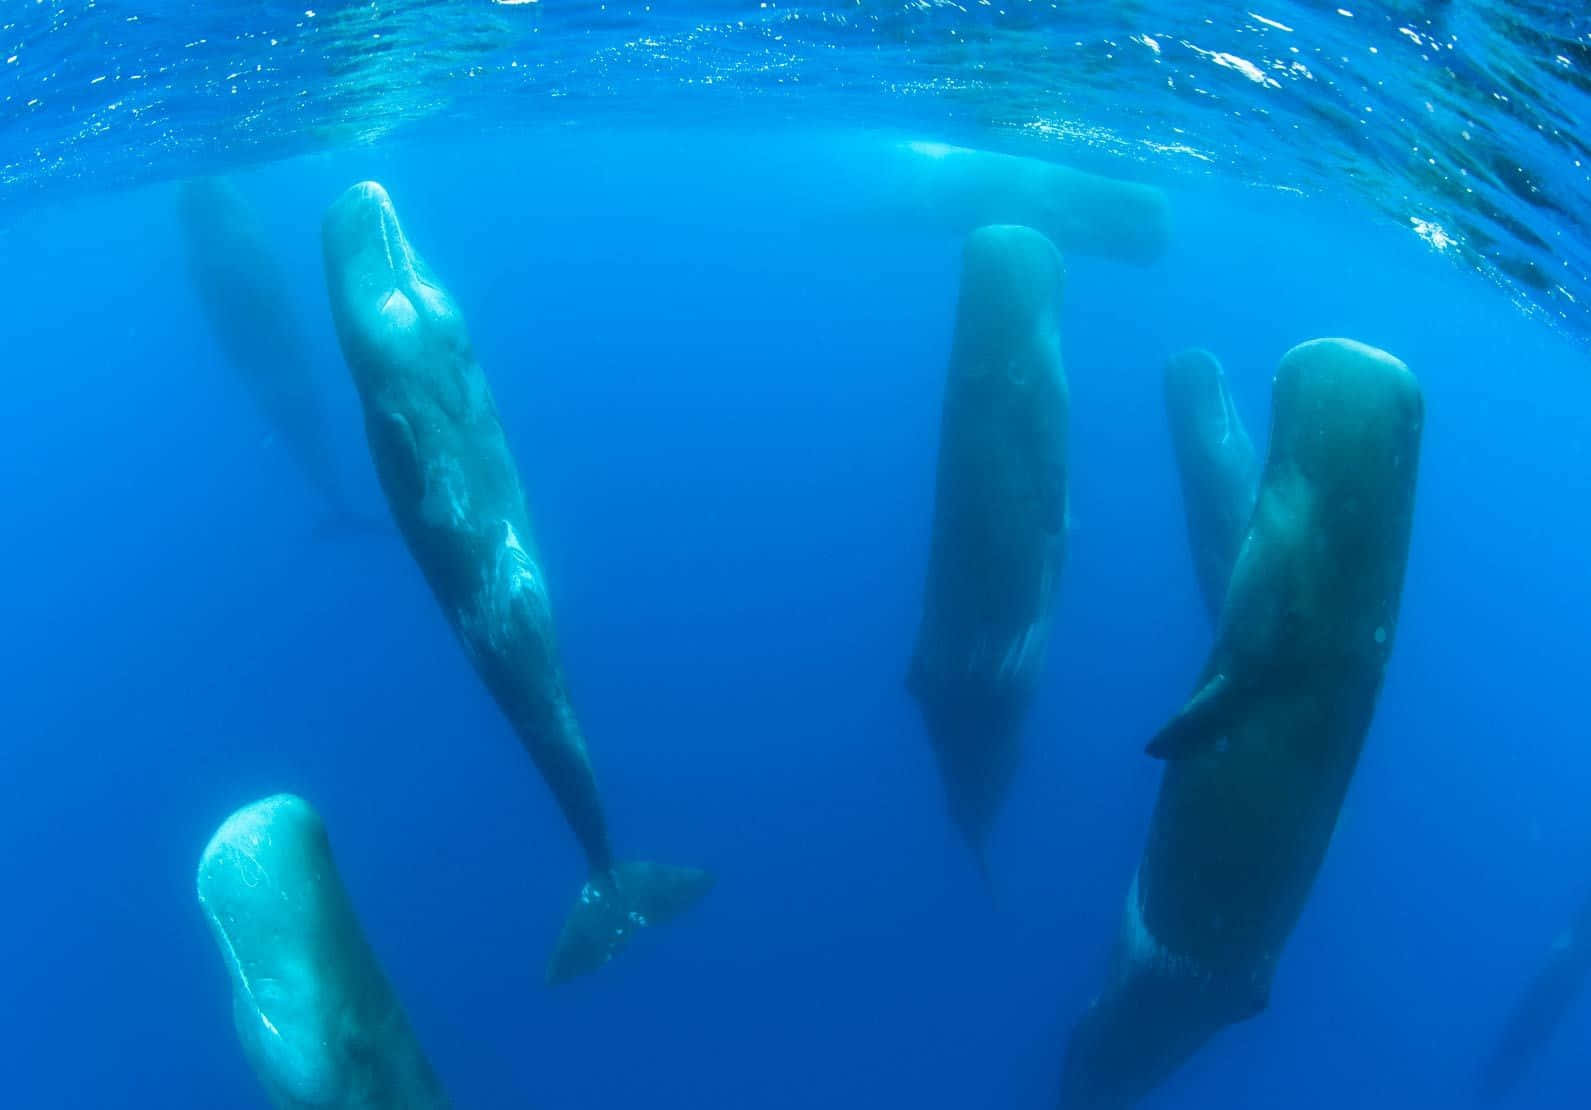 An up-close look at a majestic sperm whale